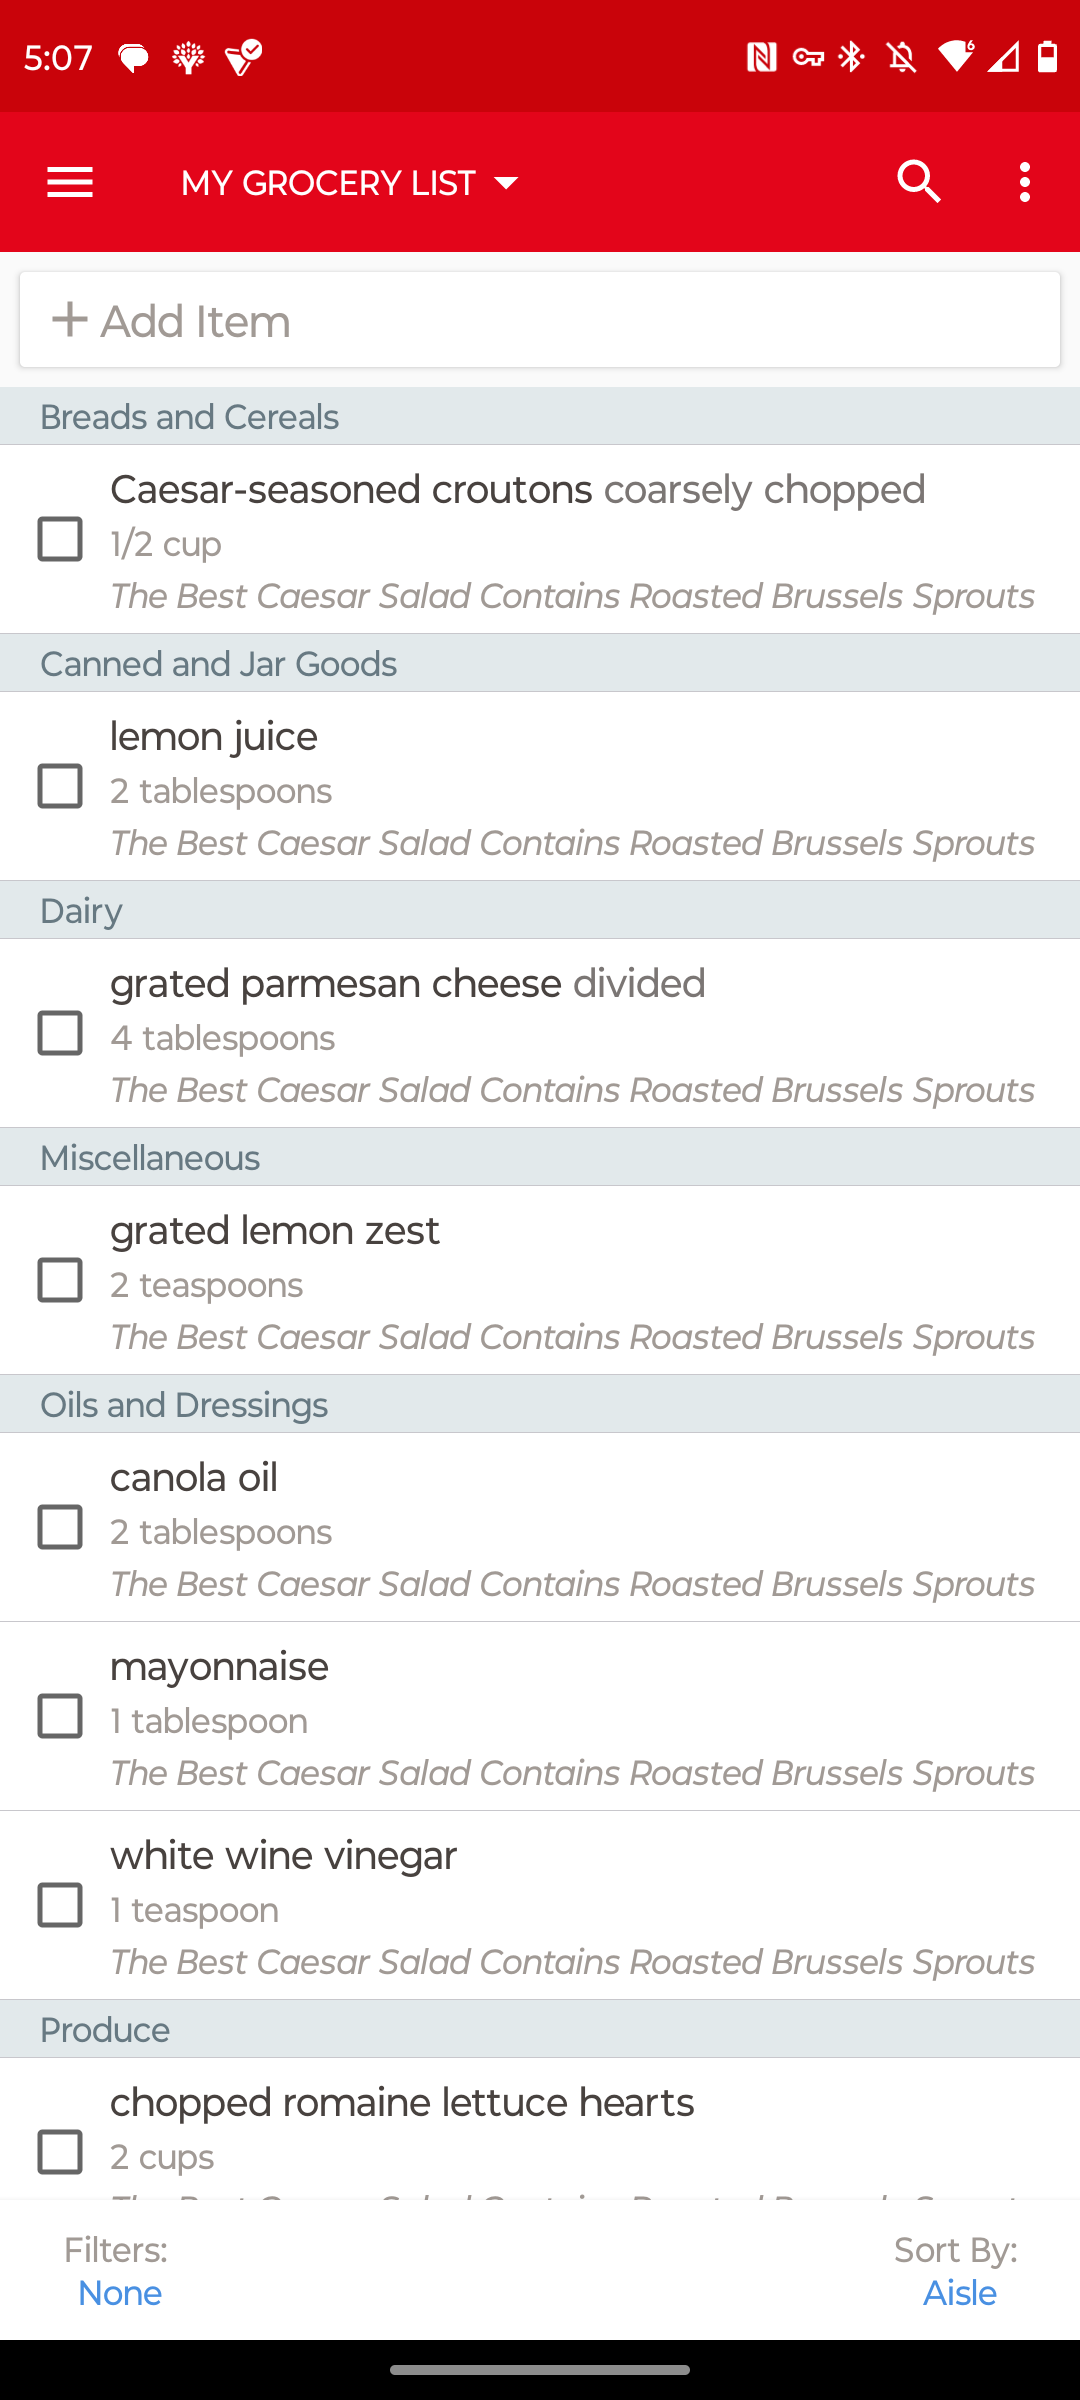 A grocery list in the Paprika Android app